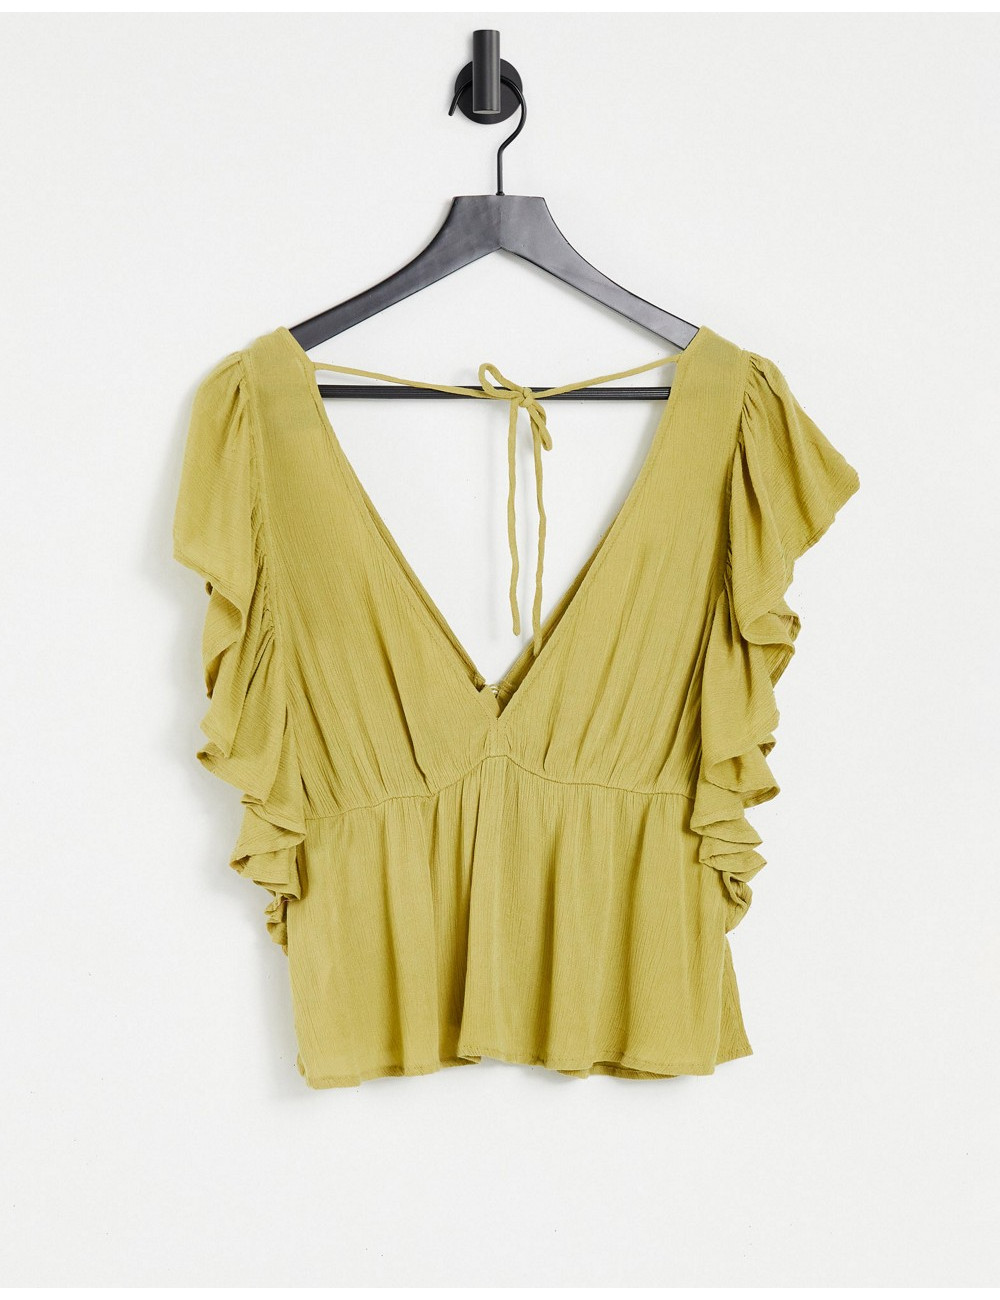 Y.A.S Tall blouse with...